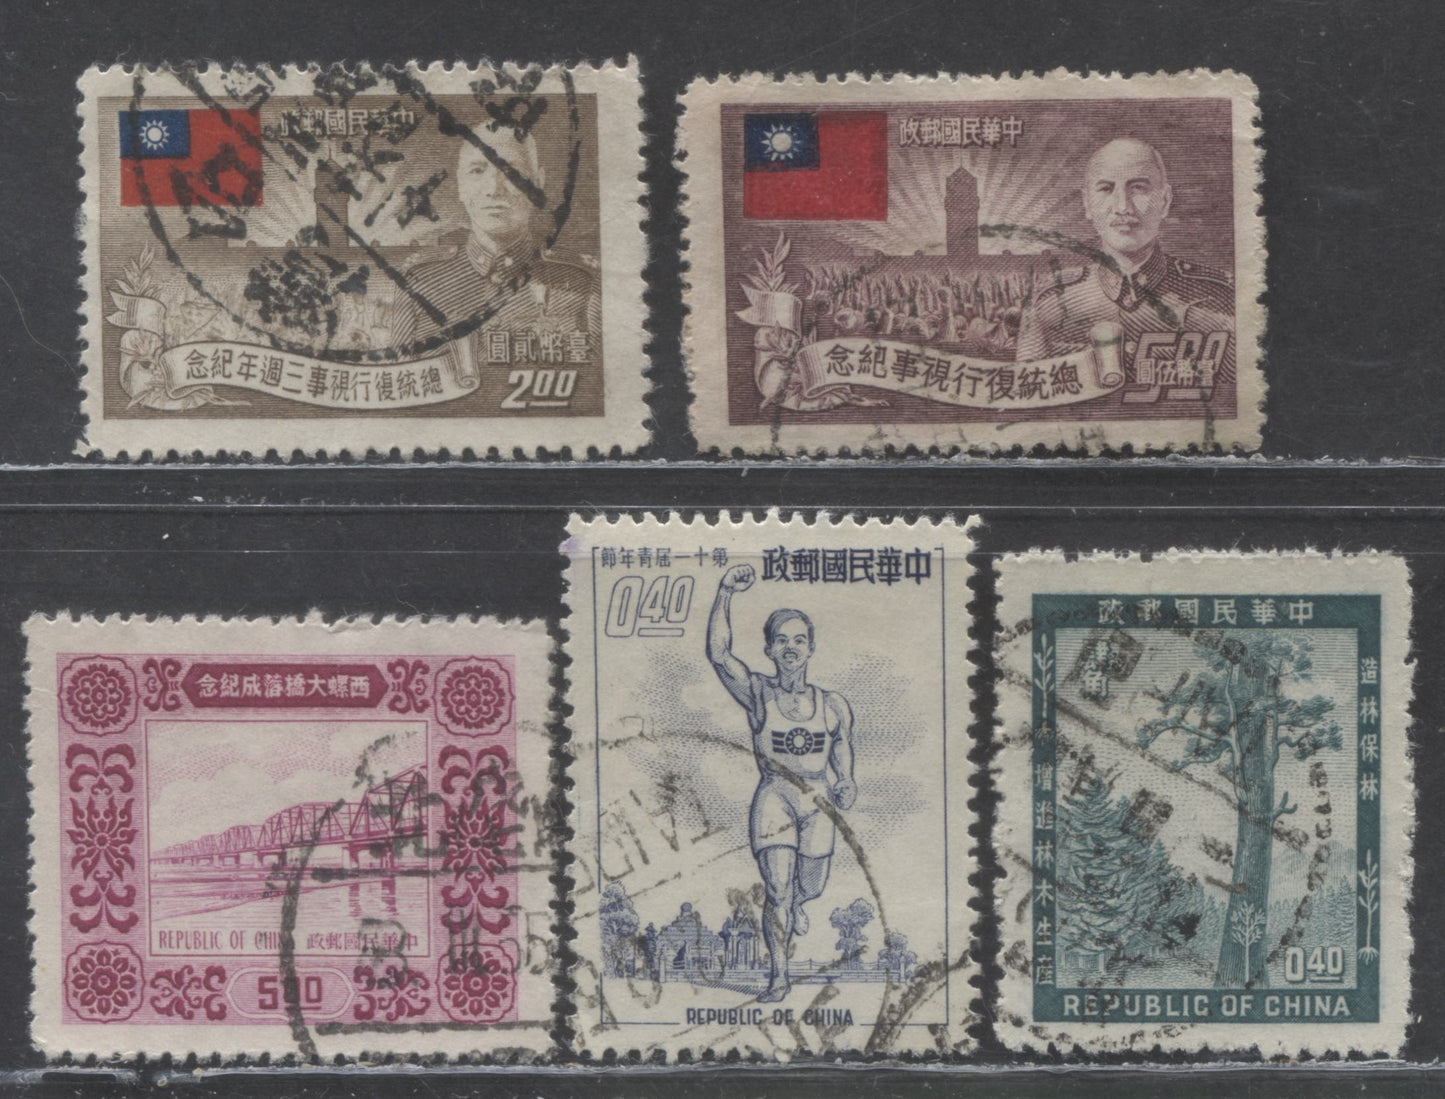 Lot 440 Republic of China SC#1050/1098 1952-1954 Definitives & Commemoratives, Better Values, 5 Fine/Very Fine Used Singles, Click on Listing to See ALL Pictures, 2017 Scott Cat. $37.5 USD